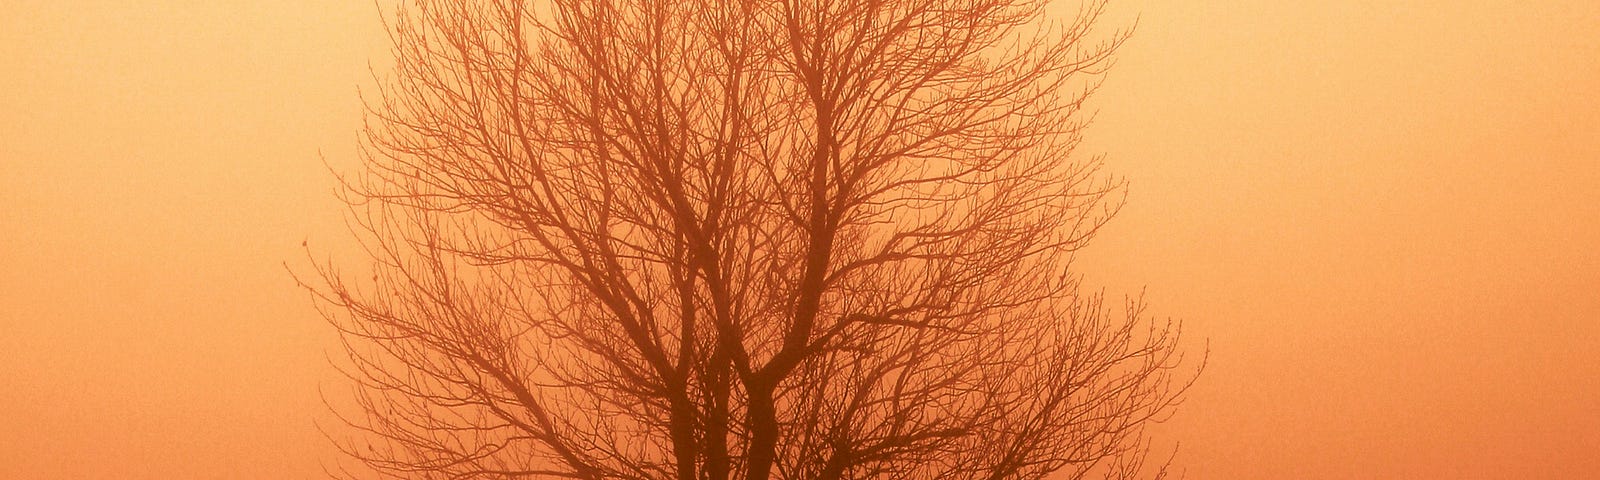 A barren tree and a man beneath it, silhouetted against a red-to-gold sunset